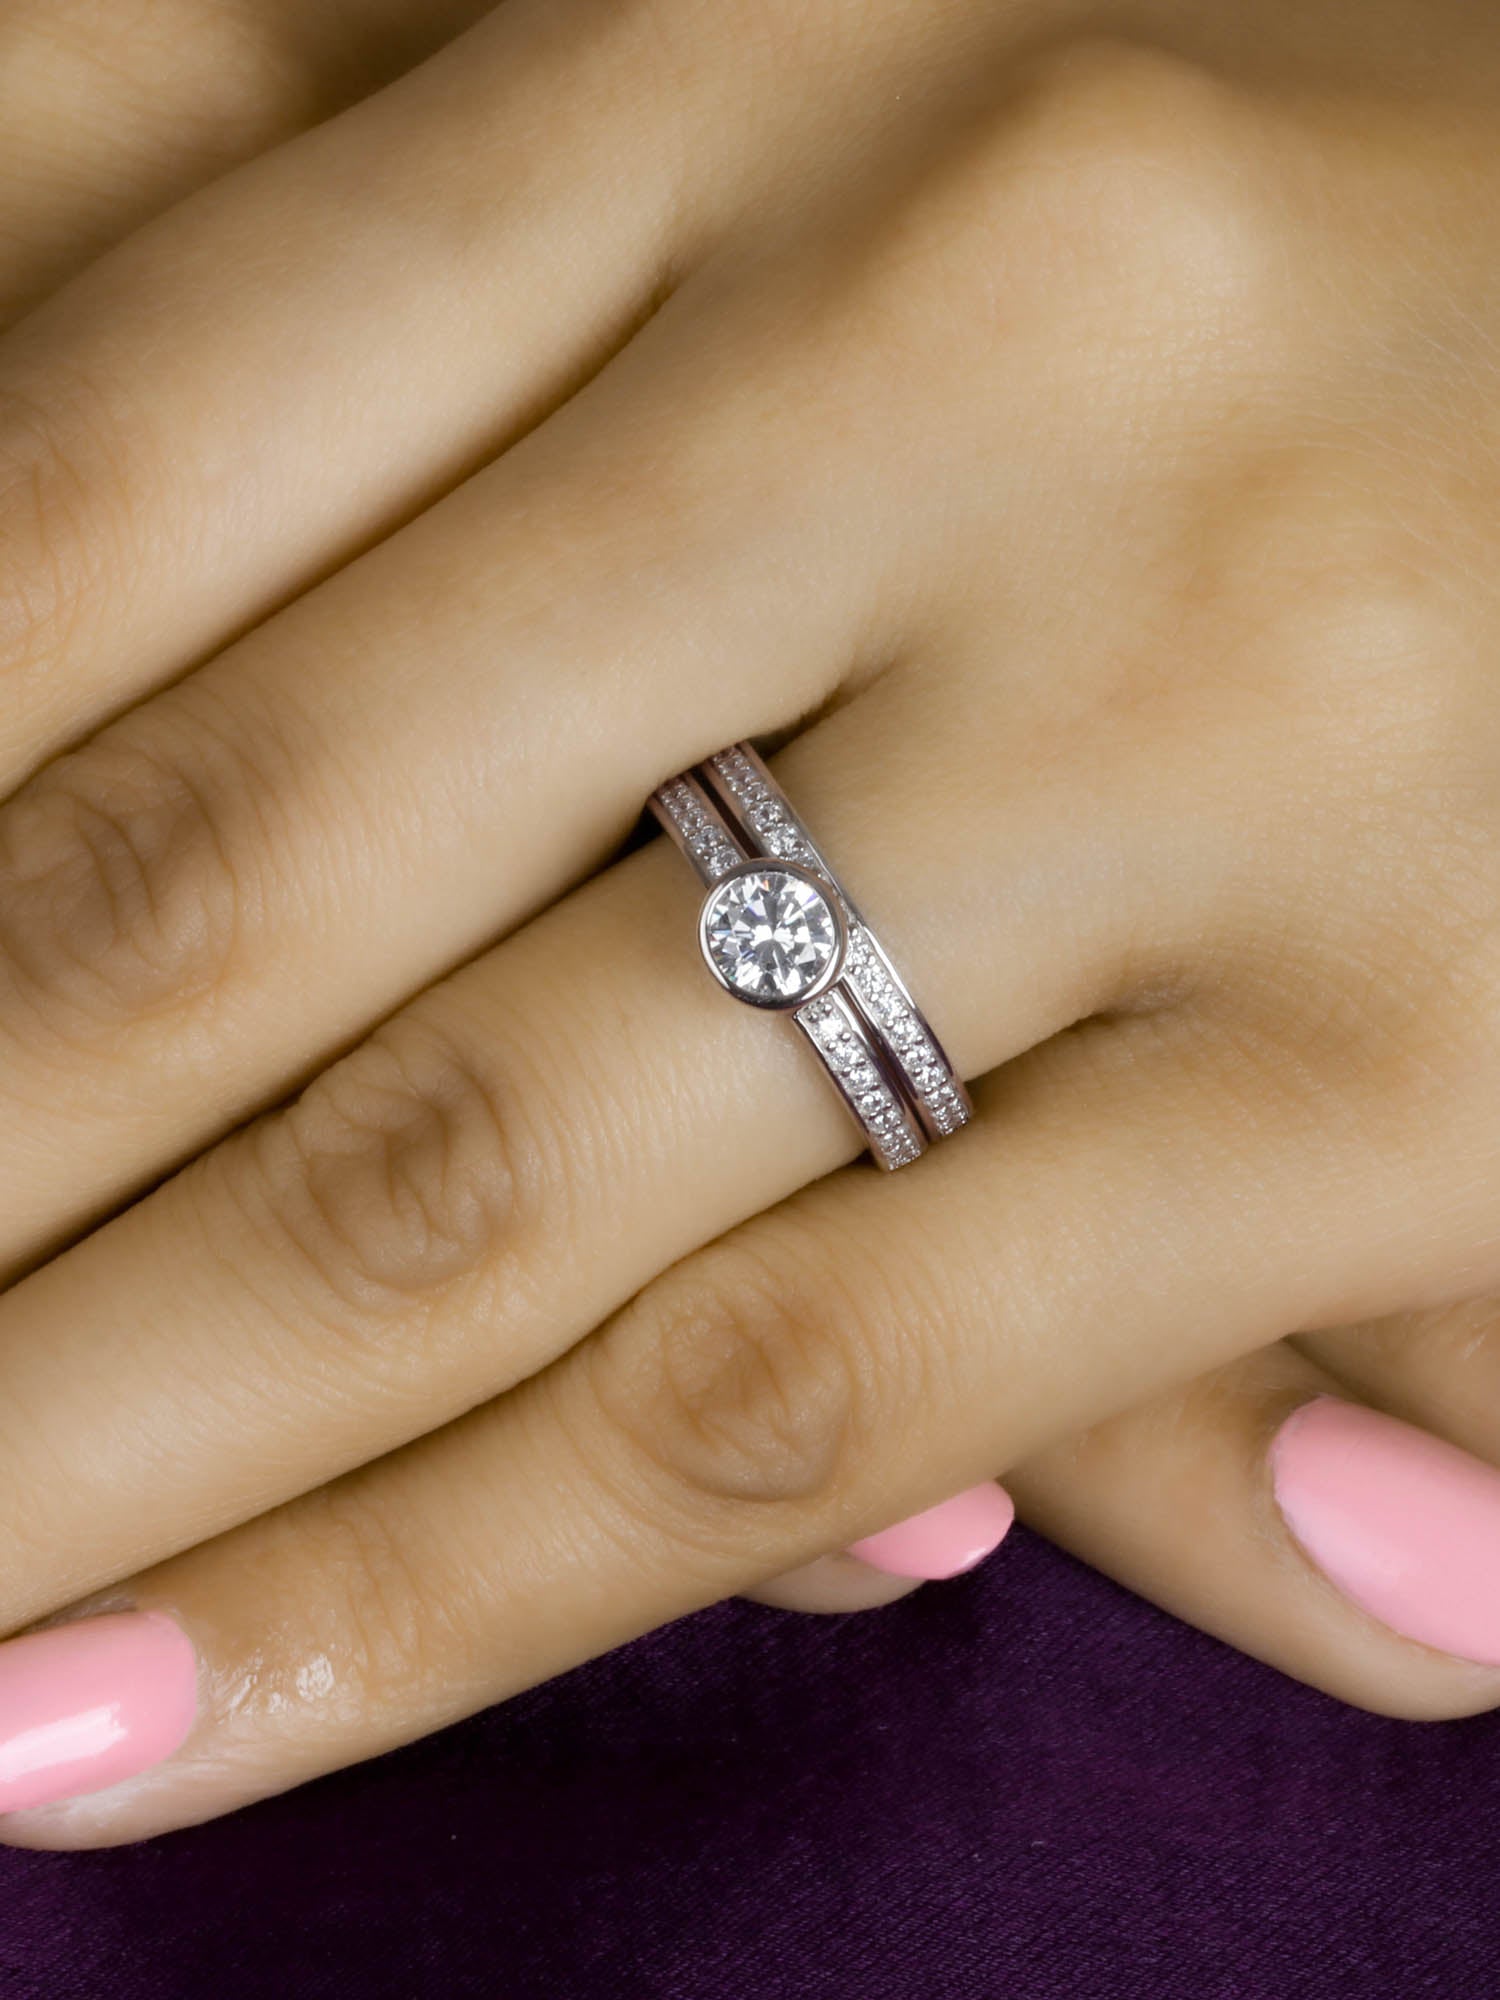 1 CARAT AMERICAN DIAMOND SOLITAIRE RING WITH A BAND-7